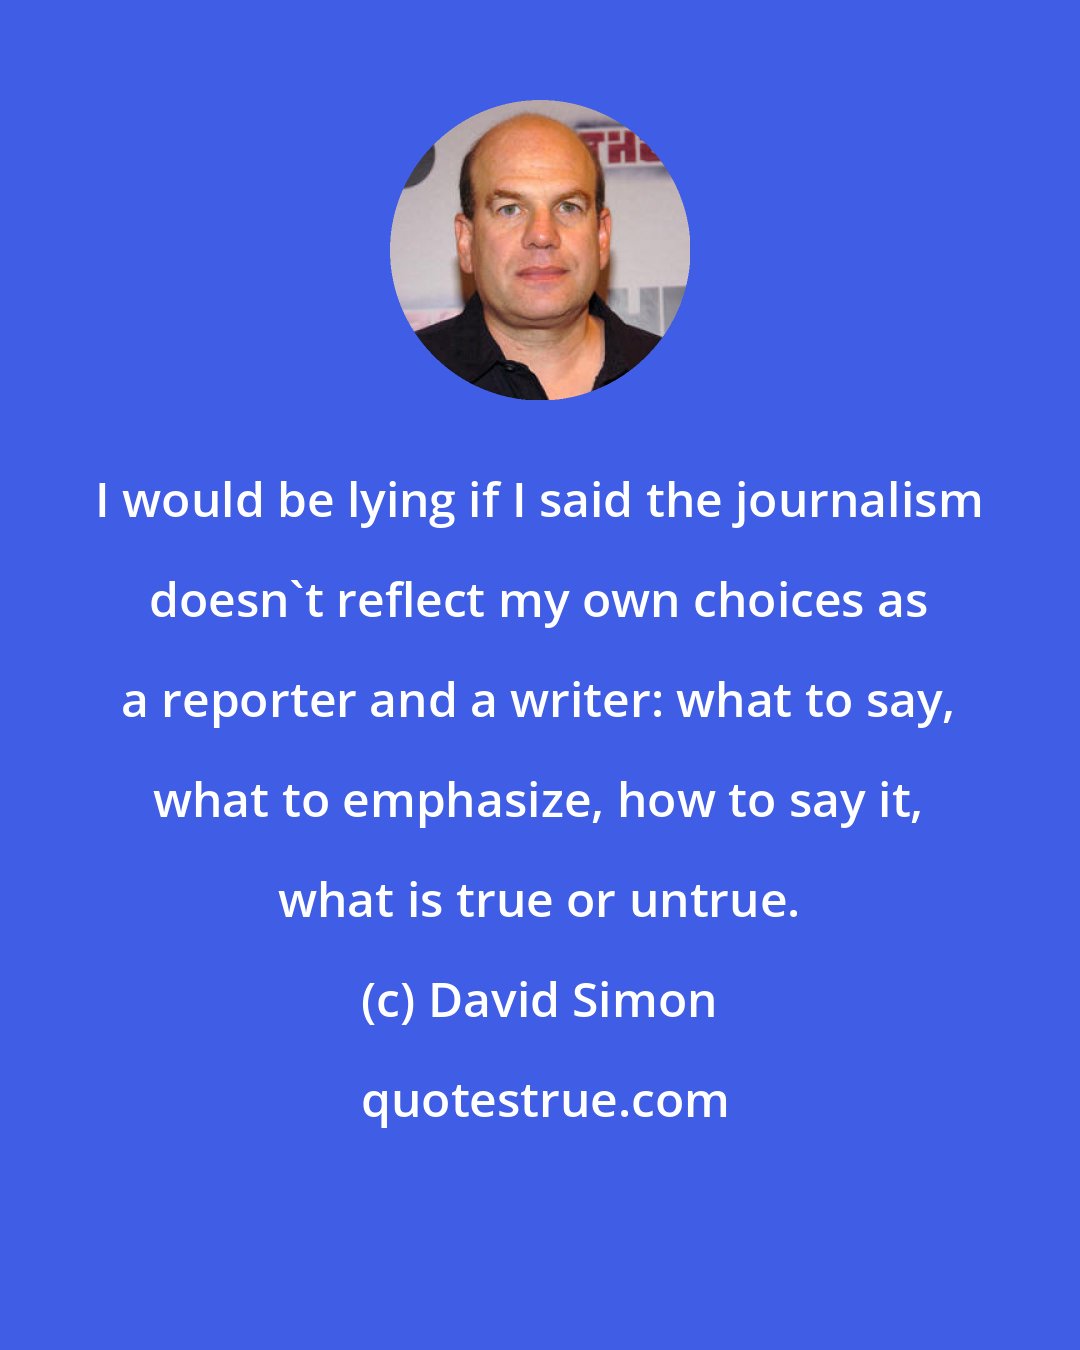 David Simon: I would be lying if I said the journalism doesn't reflect my own choices as a reporter and a writer: what to say, what to emphasize, how to say it, what is true or untrue.